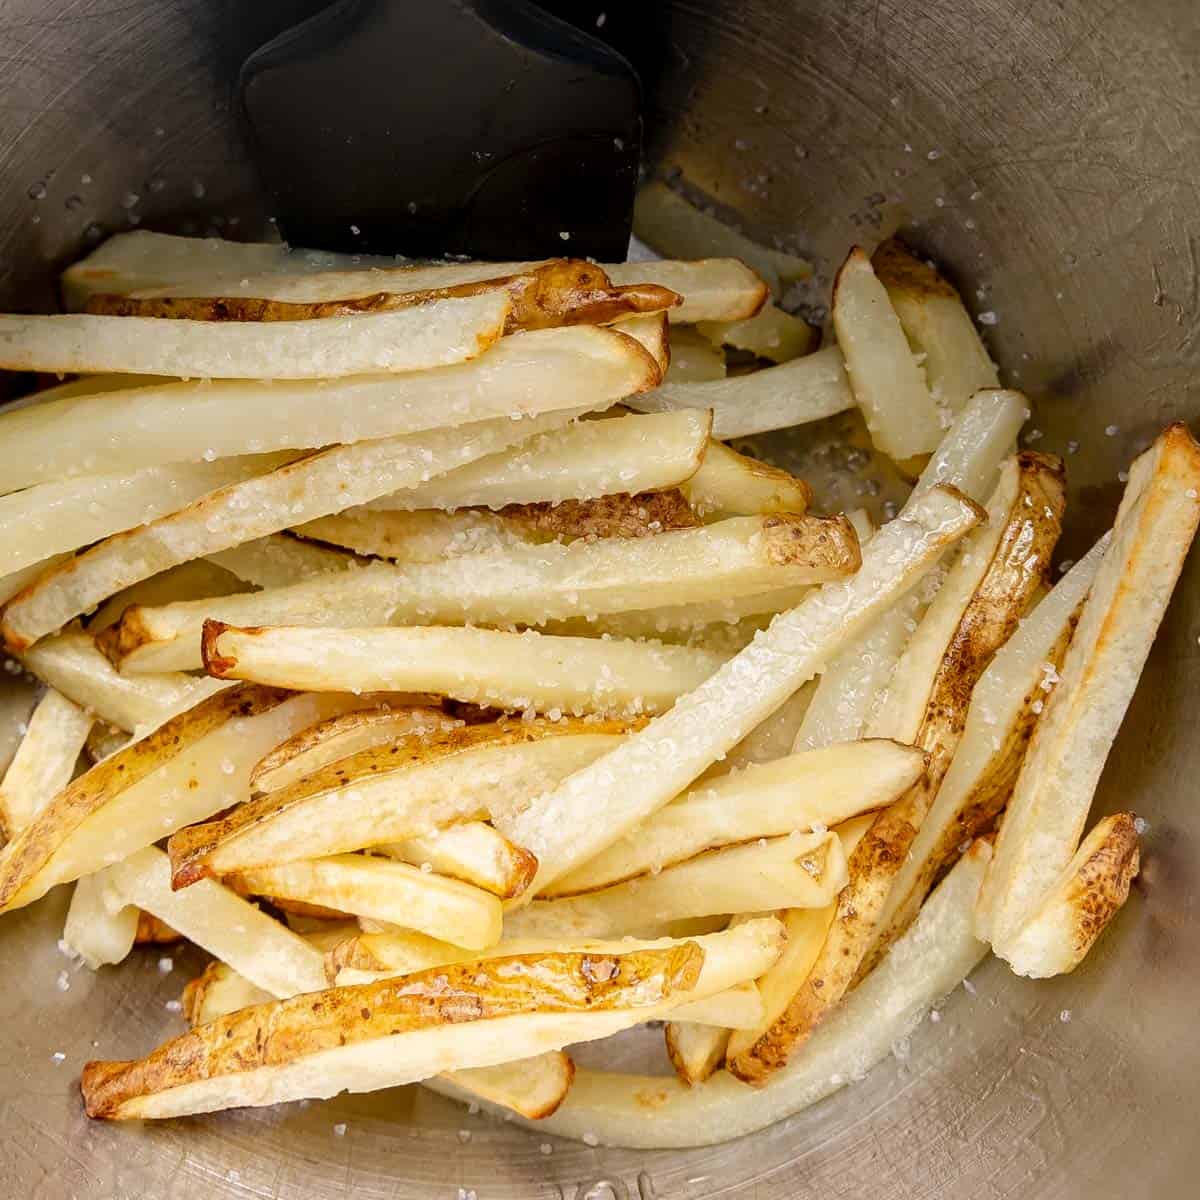 Salted french fries in a metal bowl.